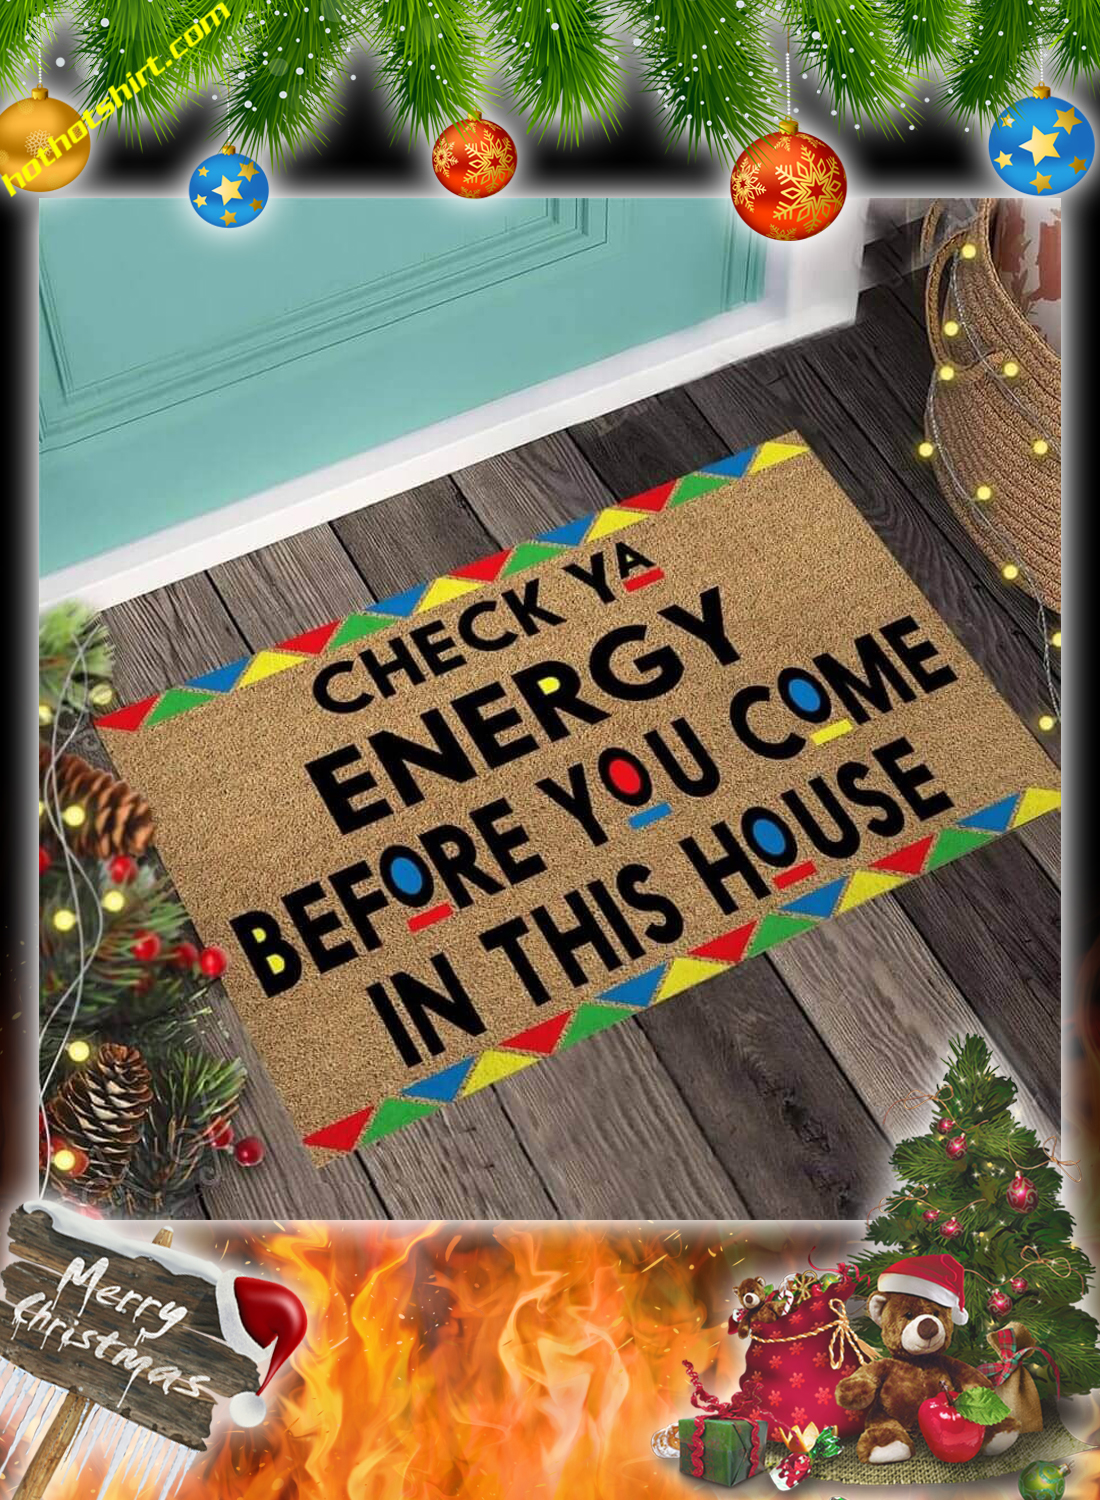 Check ya energy before you come in this house doormat 2